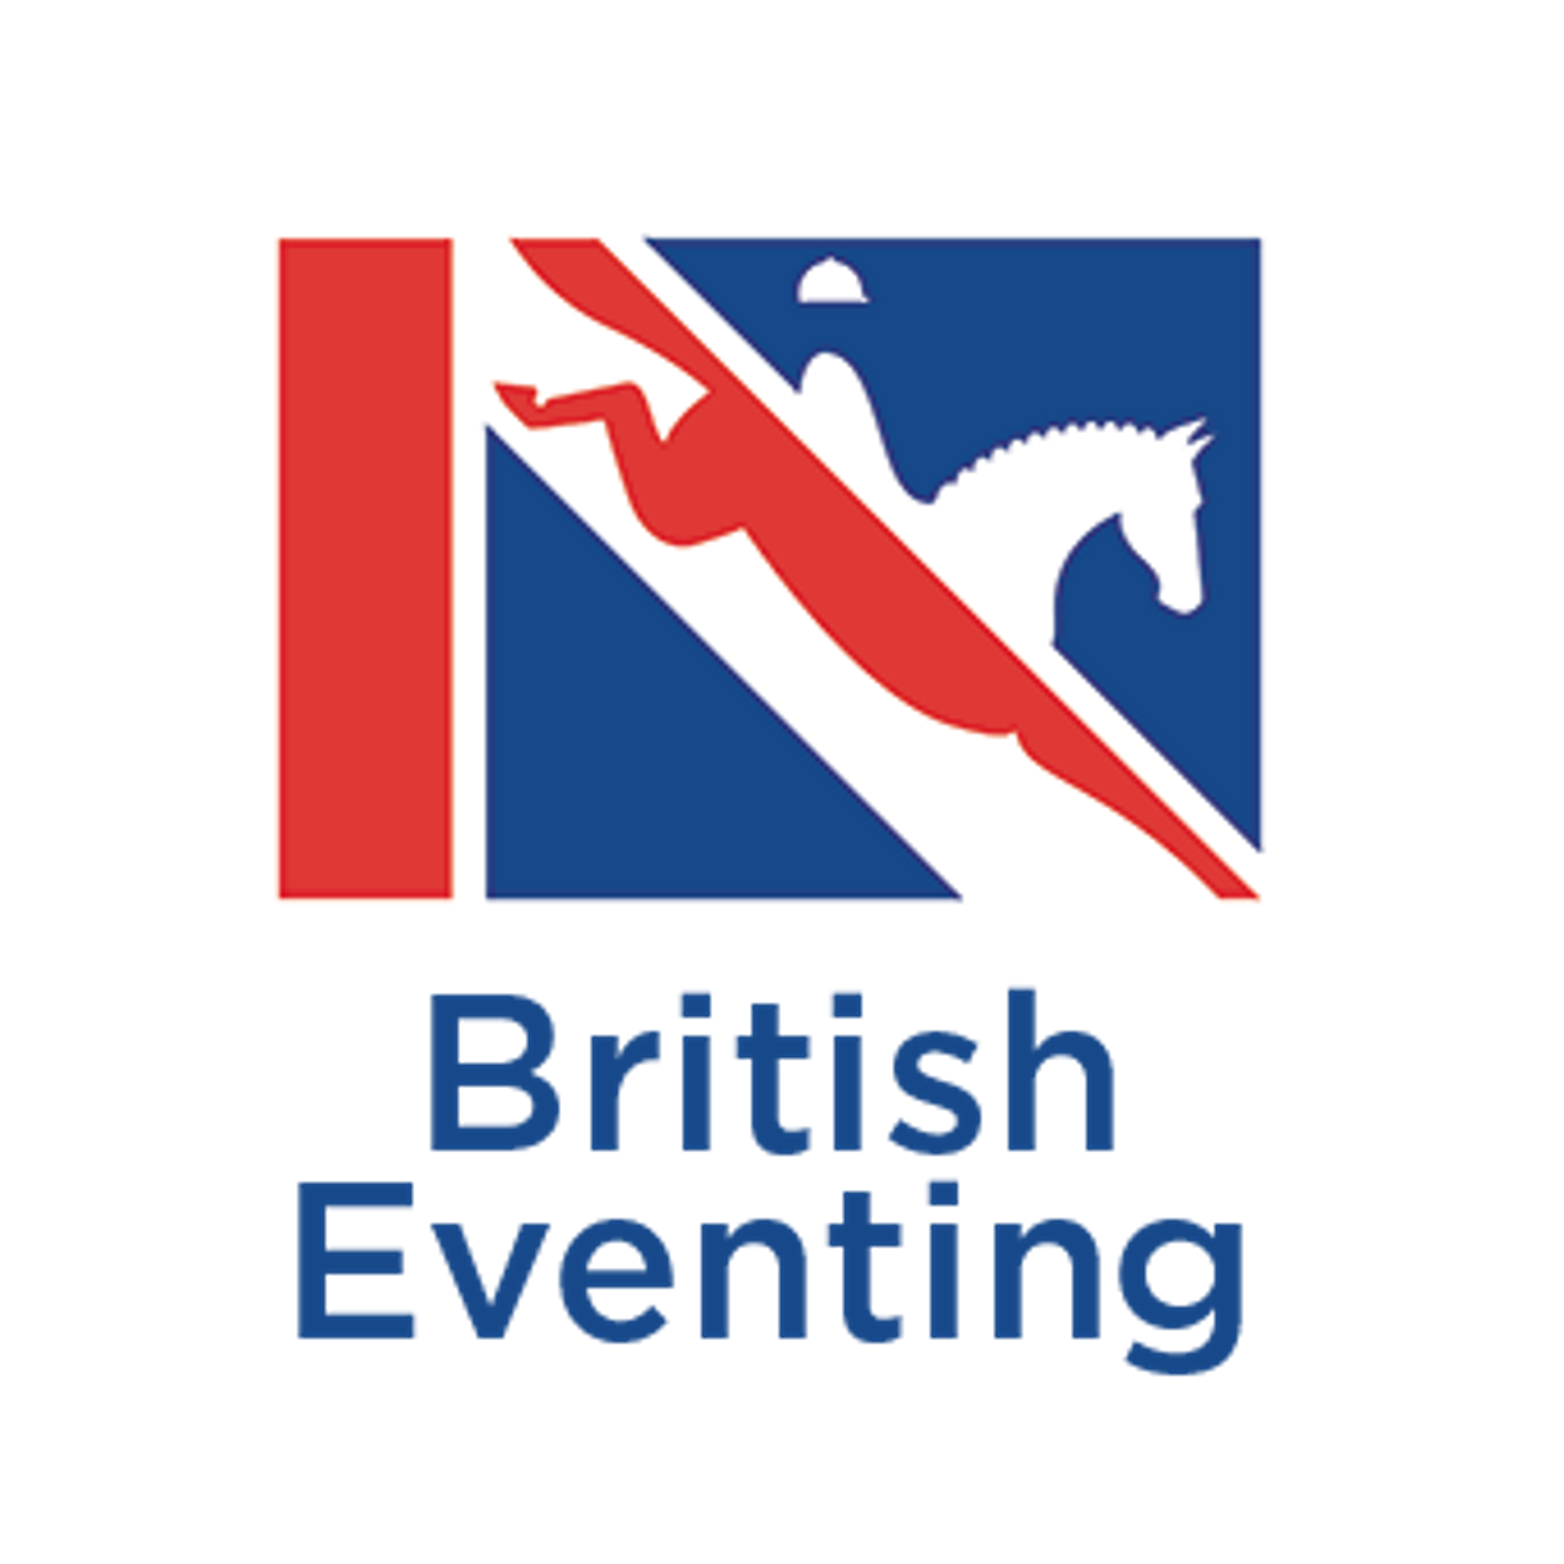 Learn more about eventing